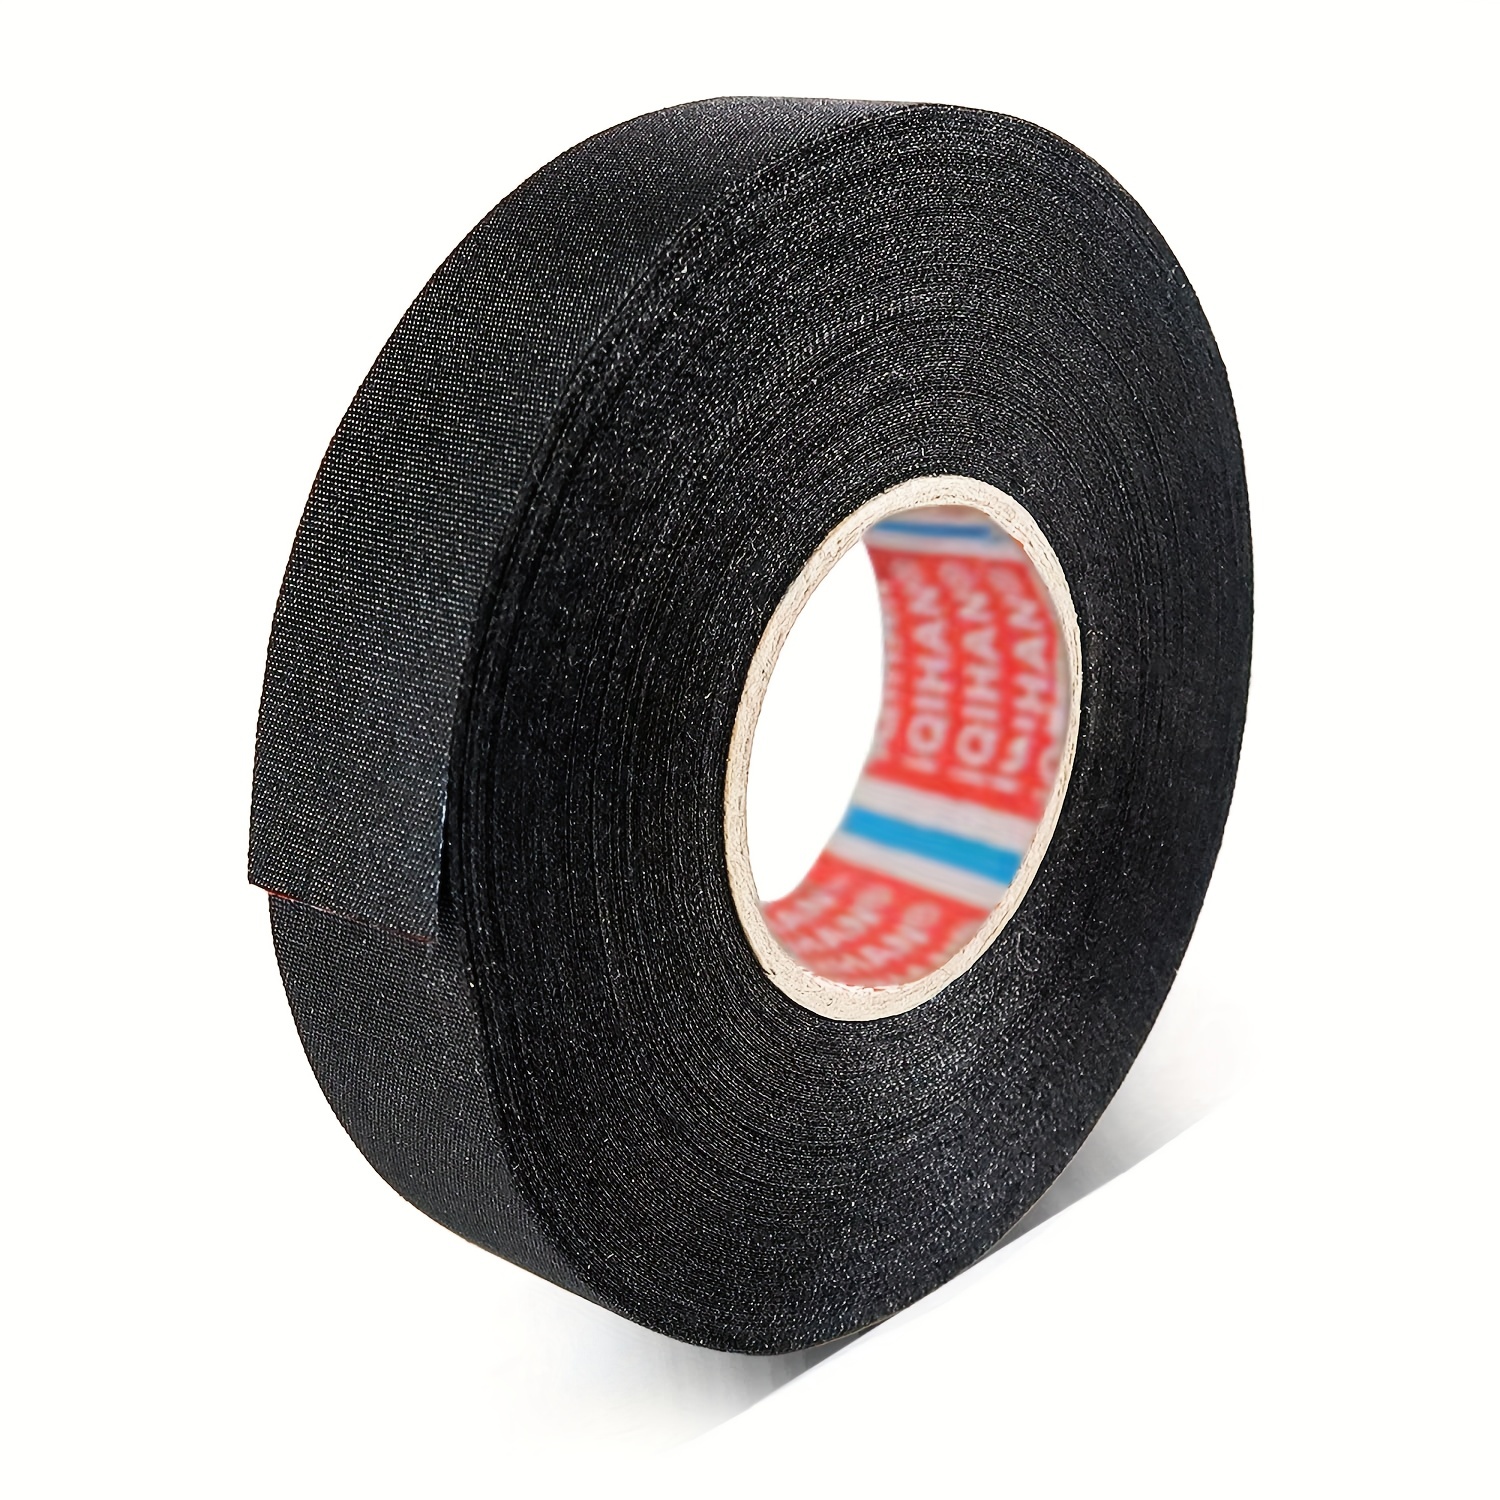 Electrical Adhesive Tape